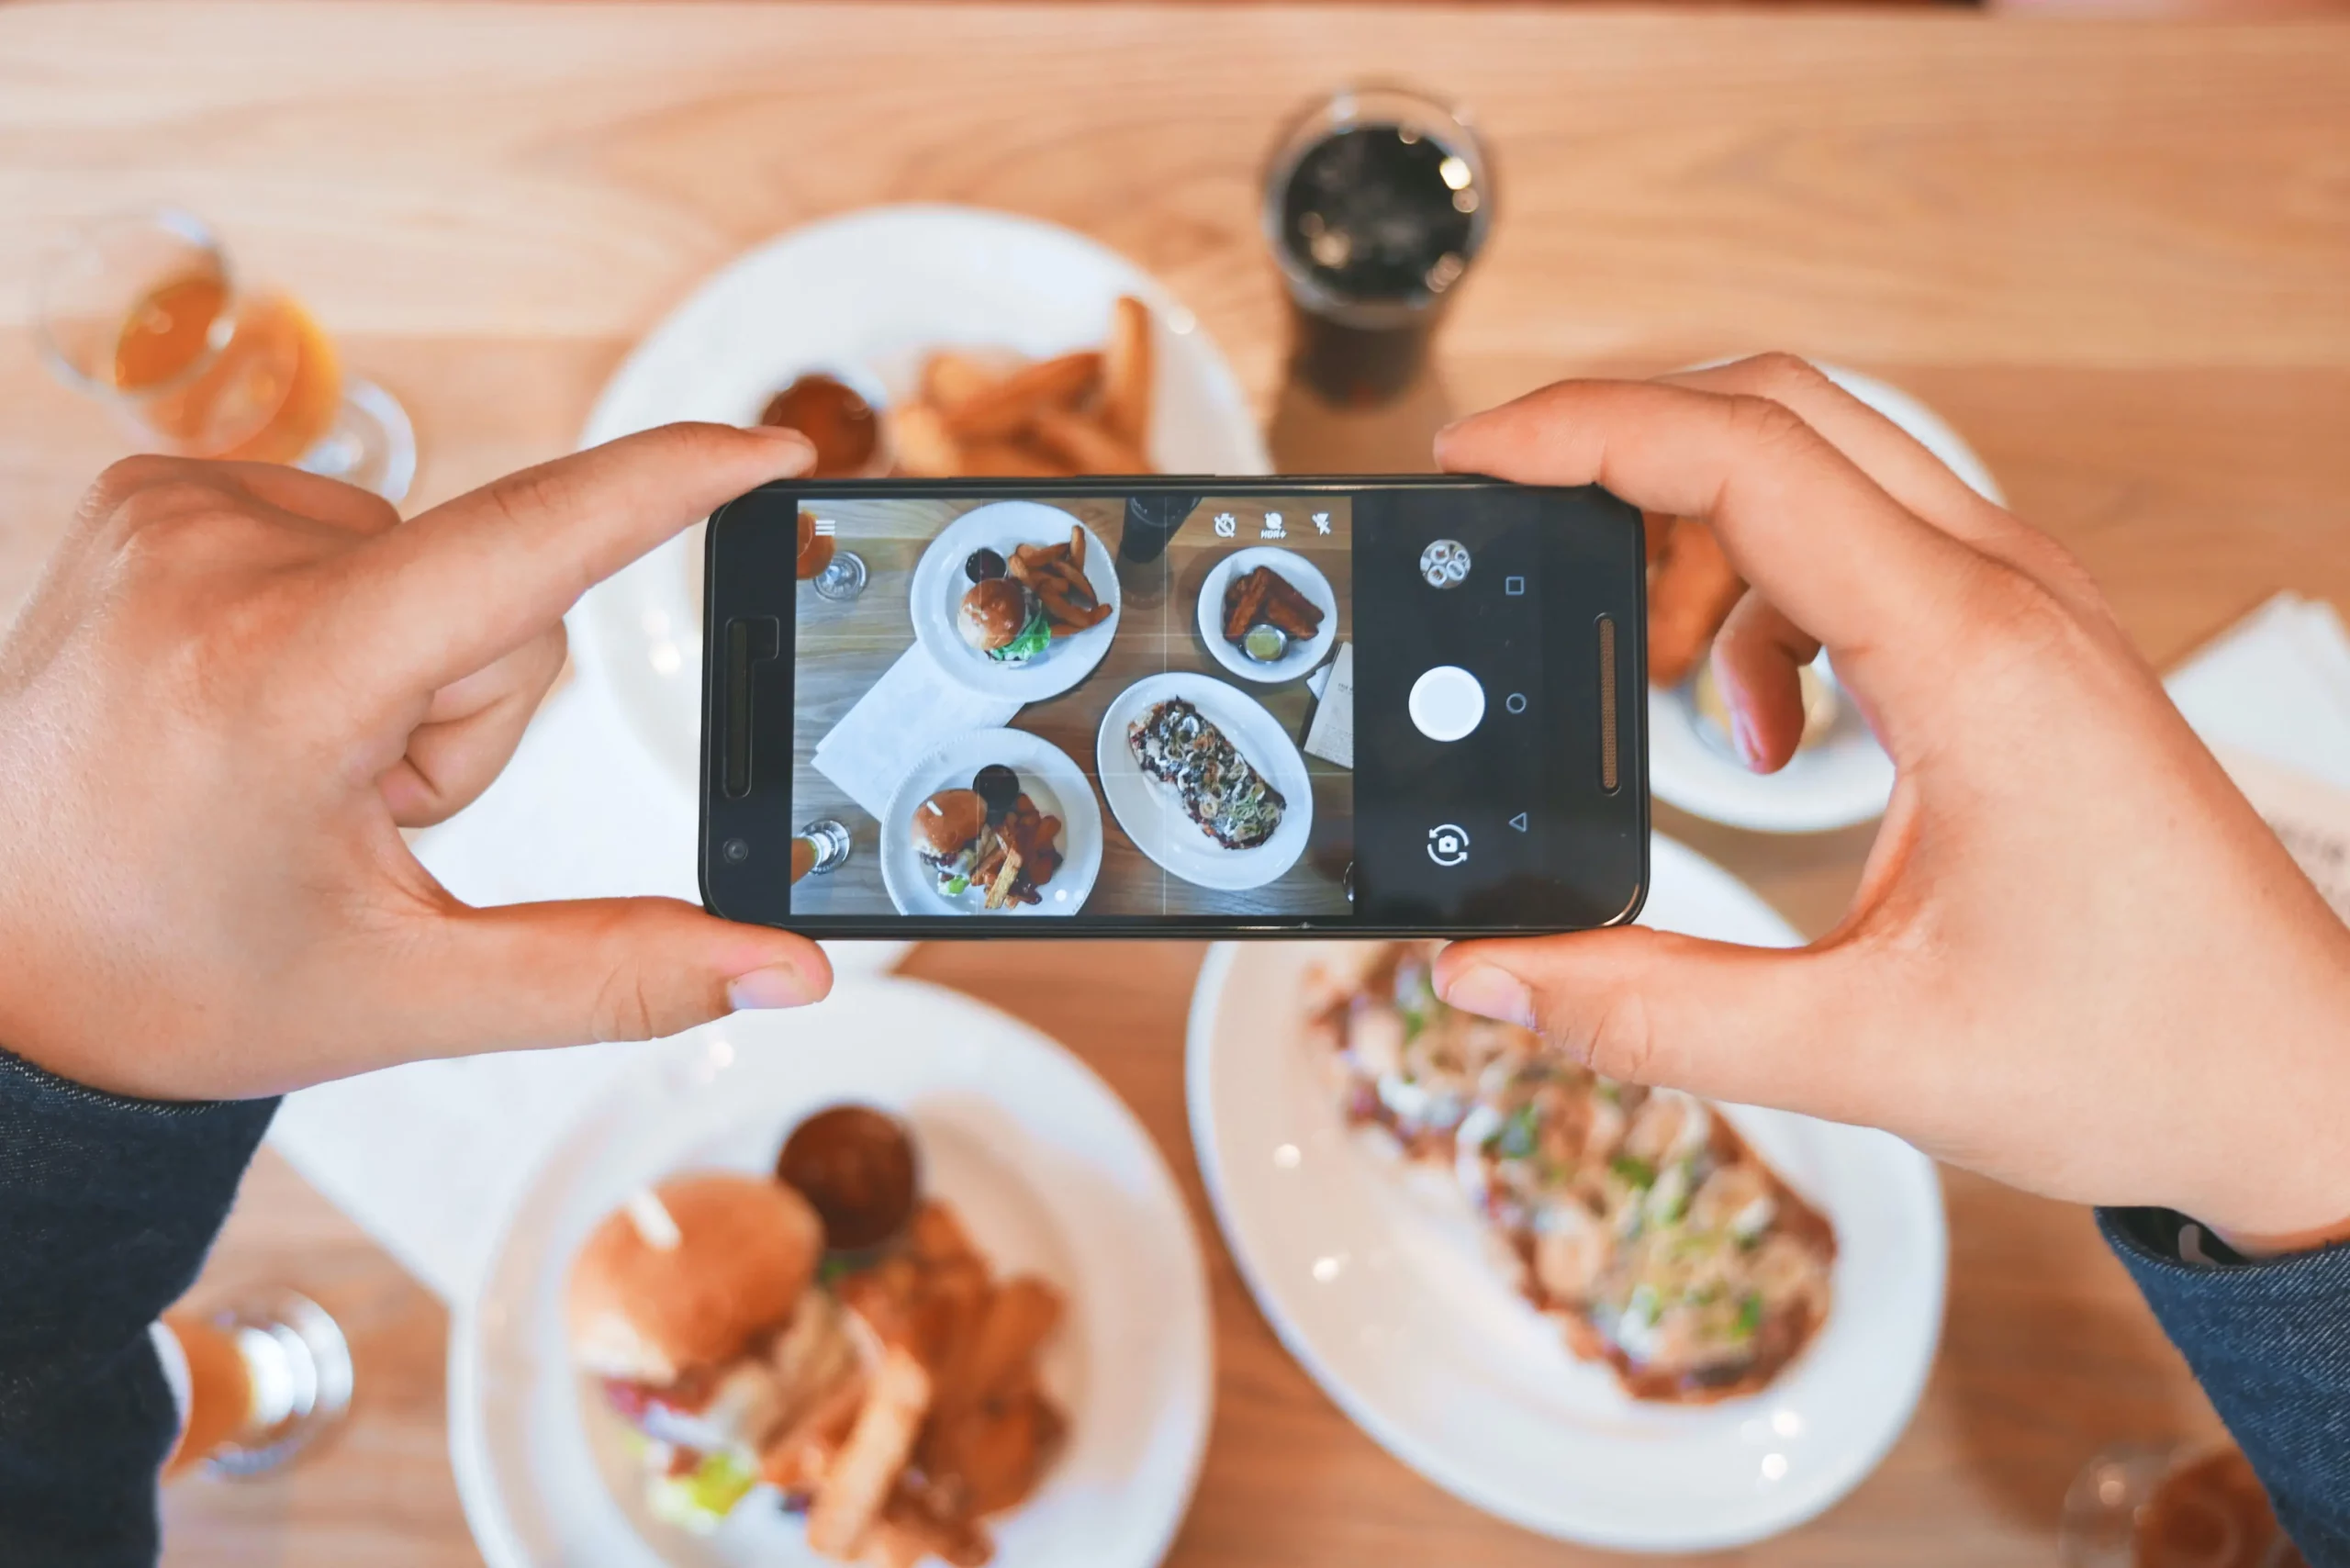 10 Great Restaurant Marketing Tips You Should Know